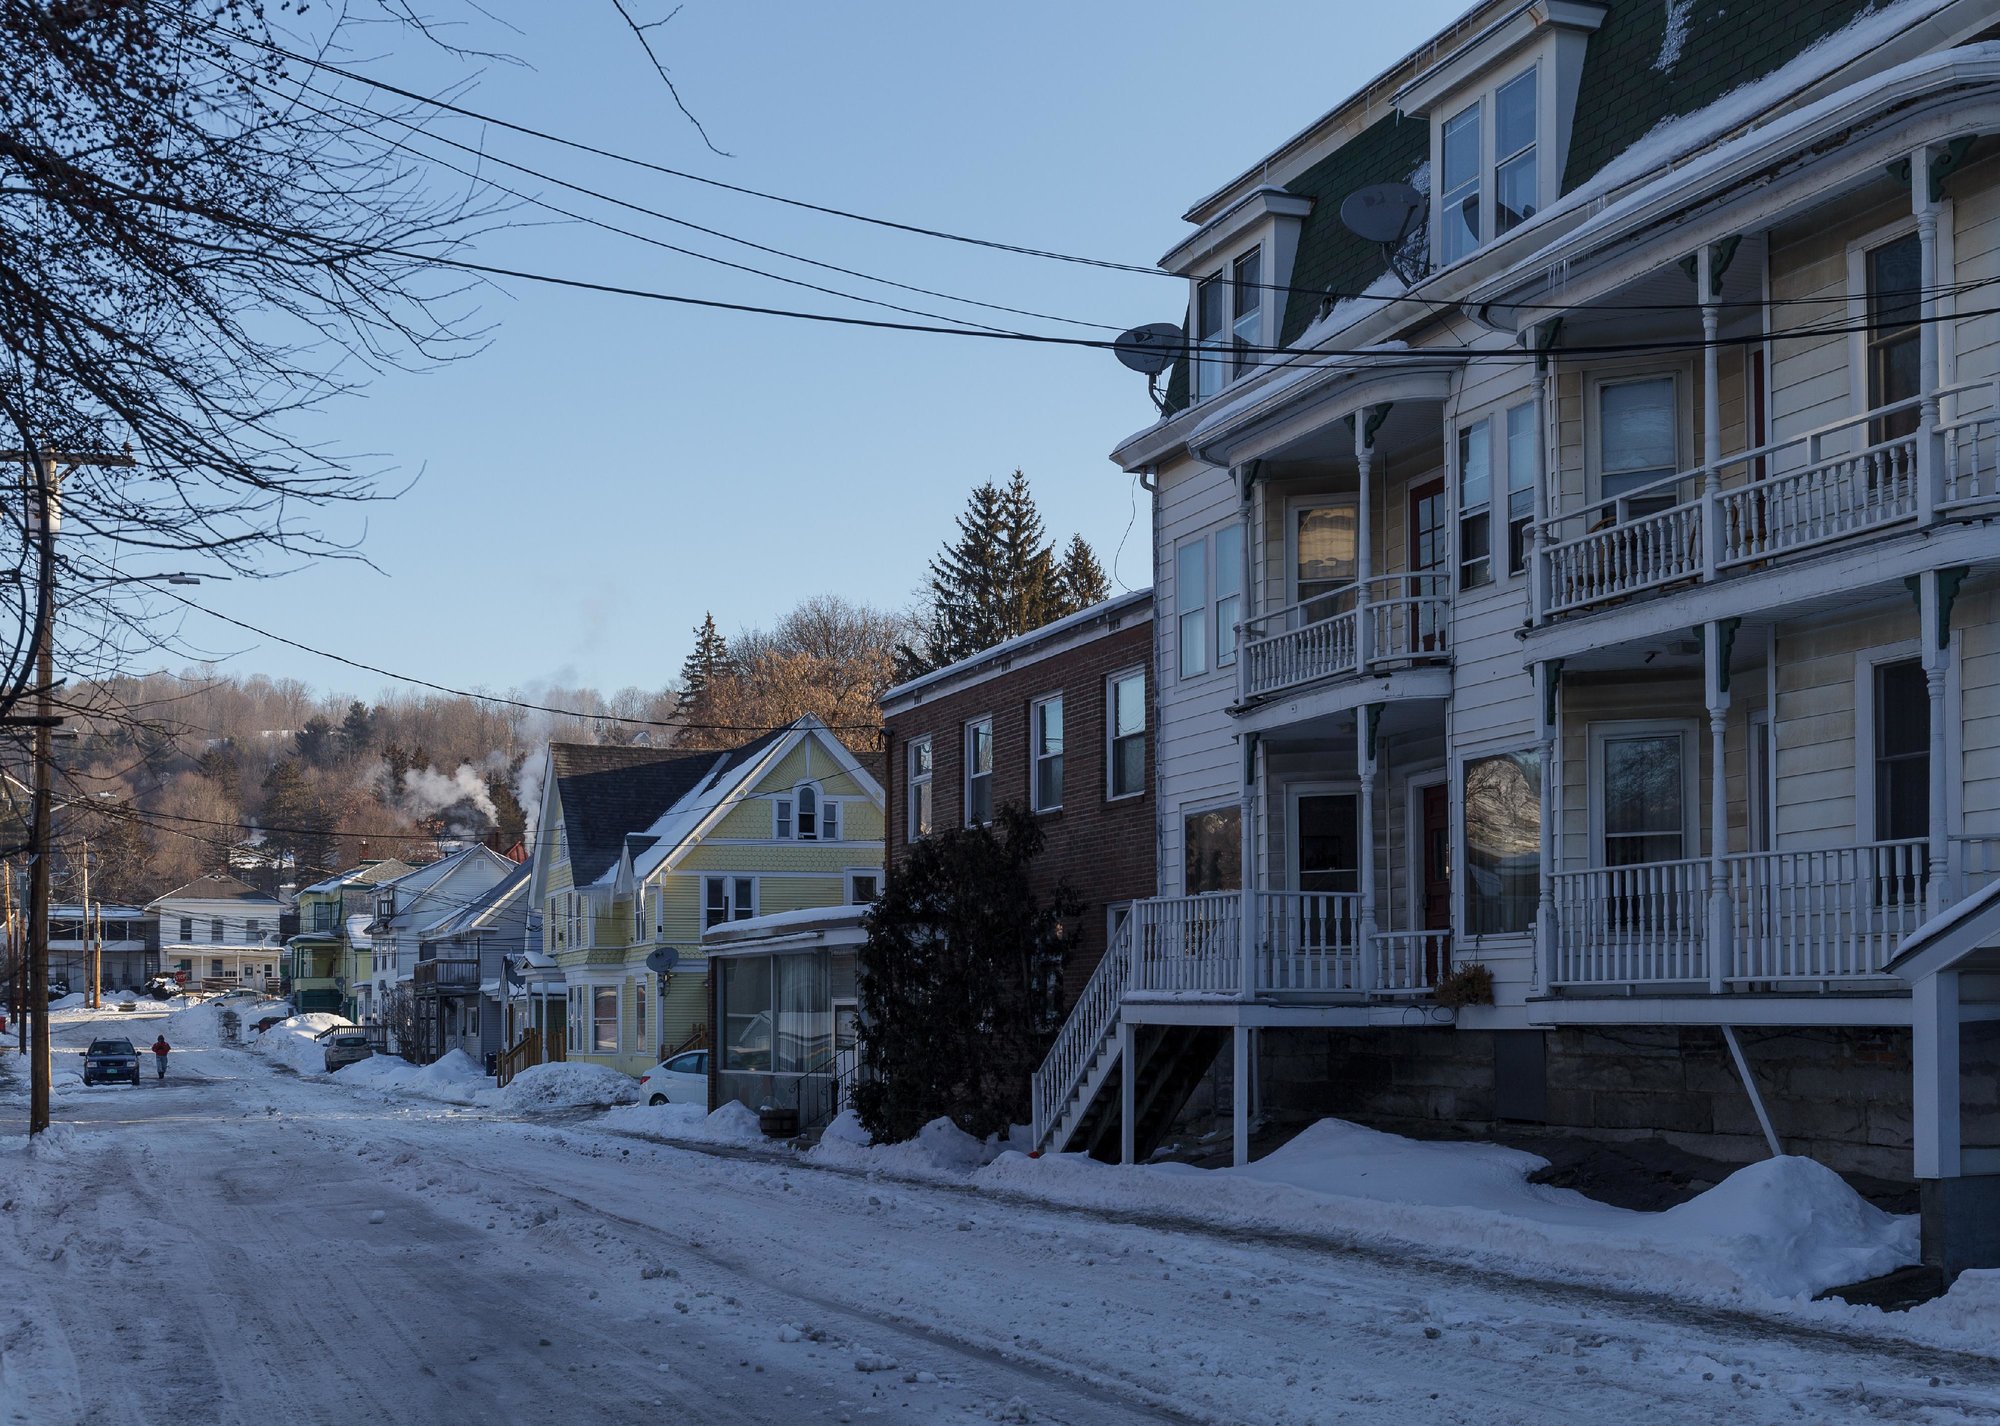  “Snowy residential street with three-story home in the foreground” - Source: yegorovnick // Shutterstock